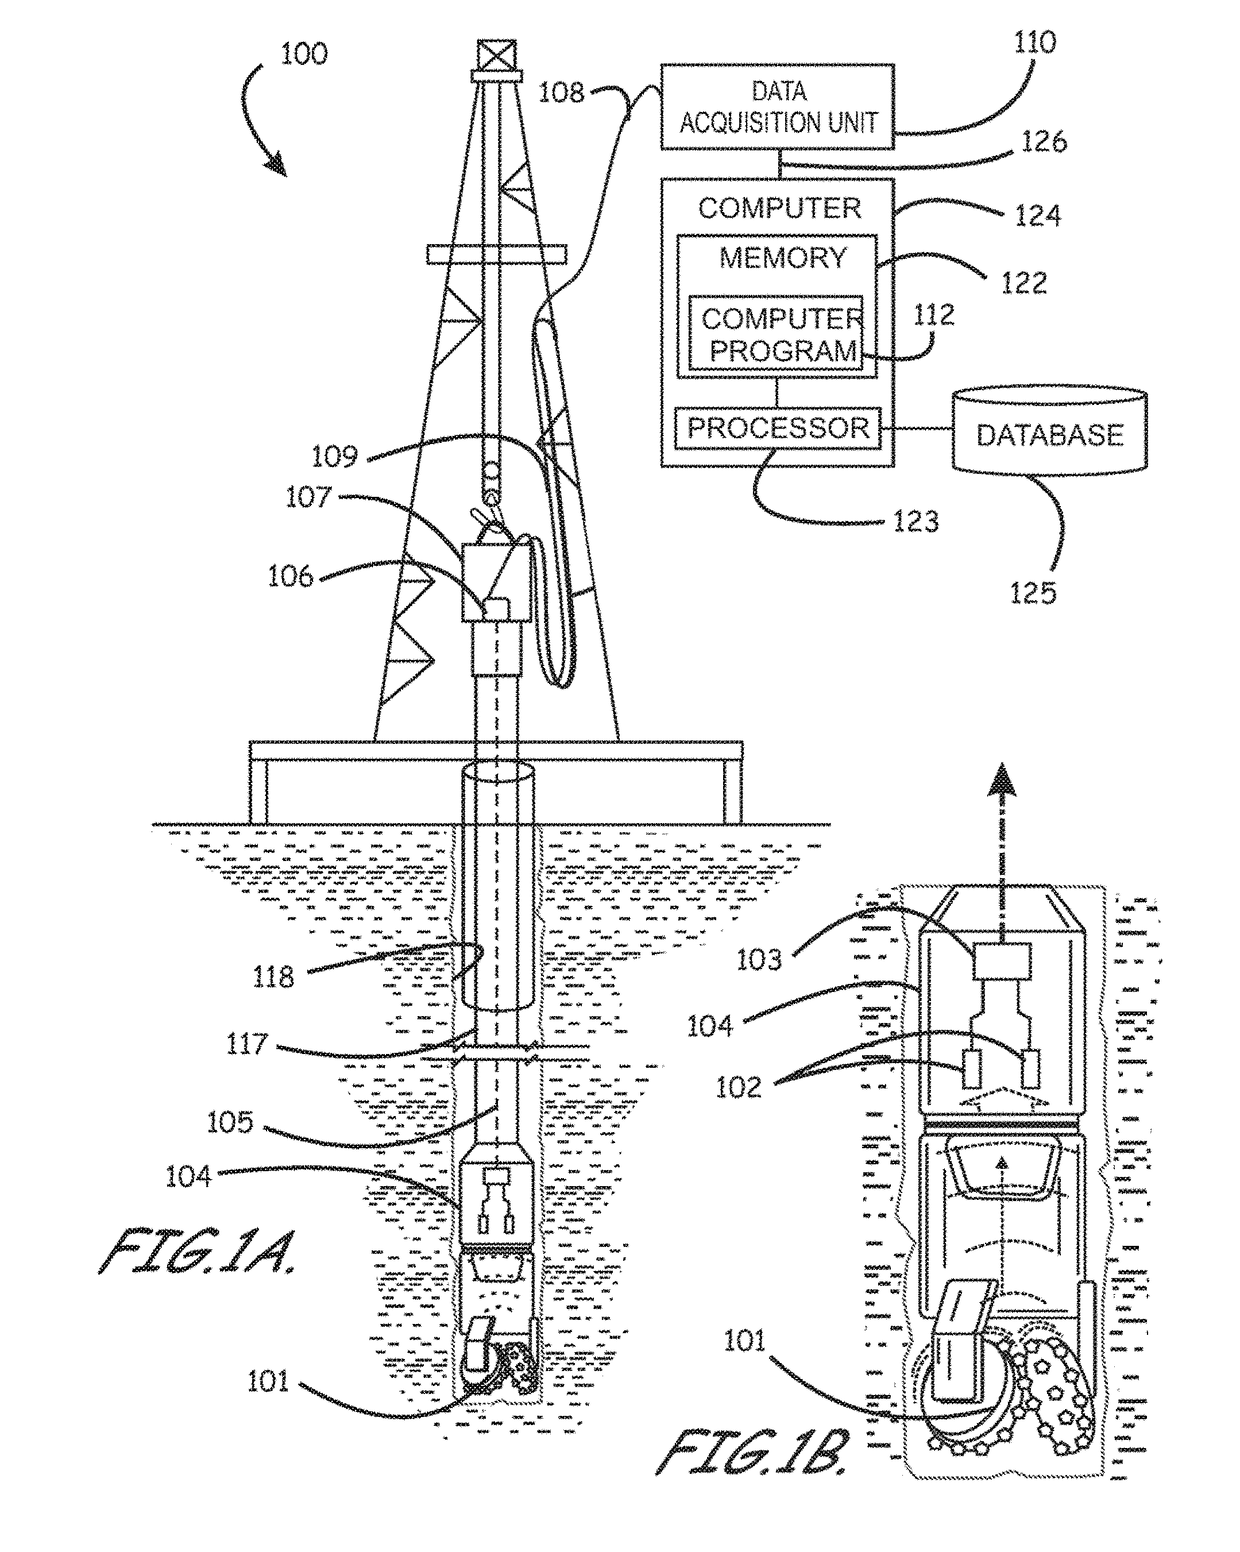 Apparatus and Methods of Evaluating Rock Properties While Drilling Using Acoustic Sensors Installed in the Drilling Fluid Circulation System of a Drilling Rig